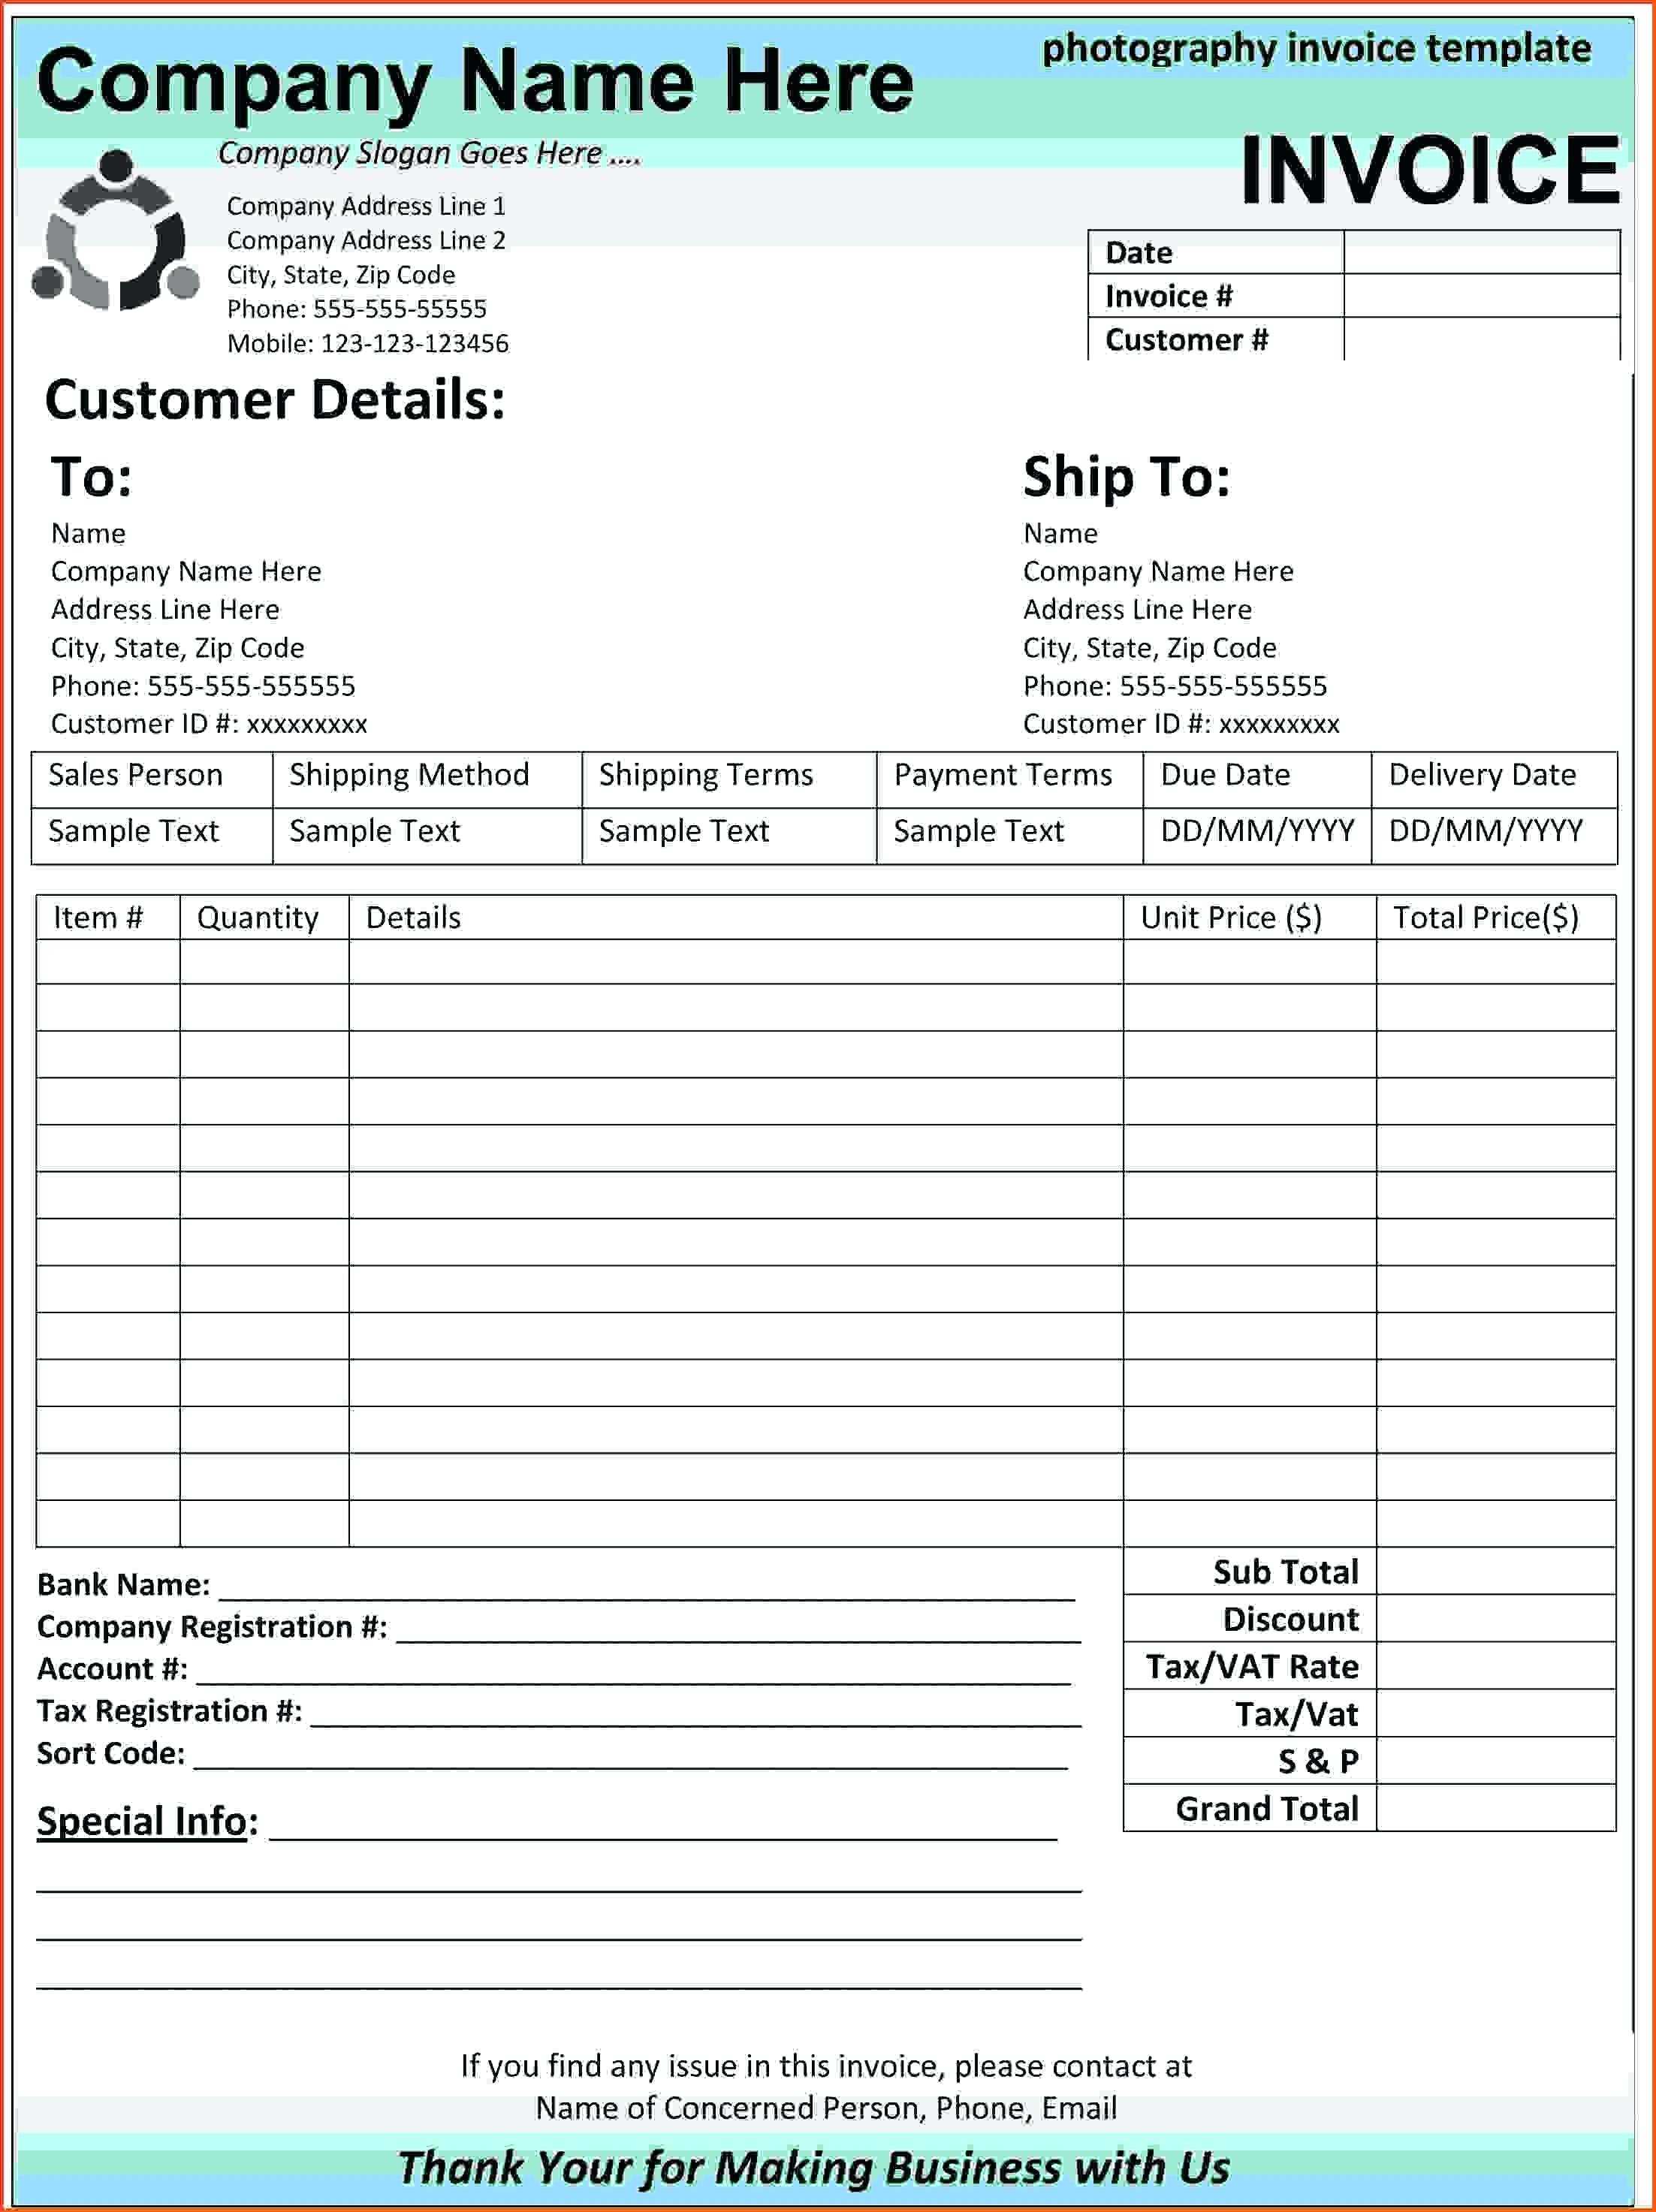 invoice-template-for-it-consulting-services-cards-design-templates